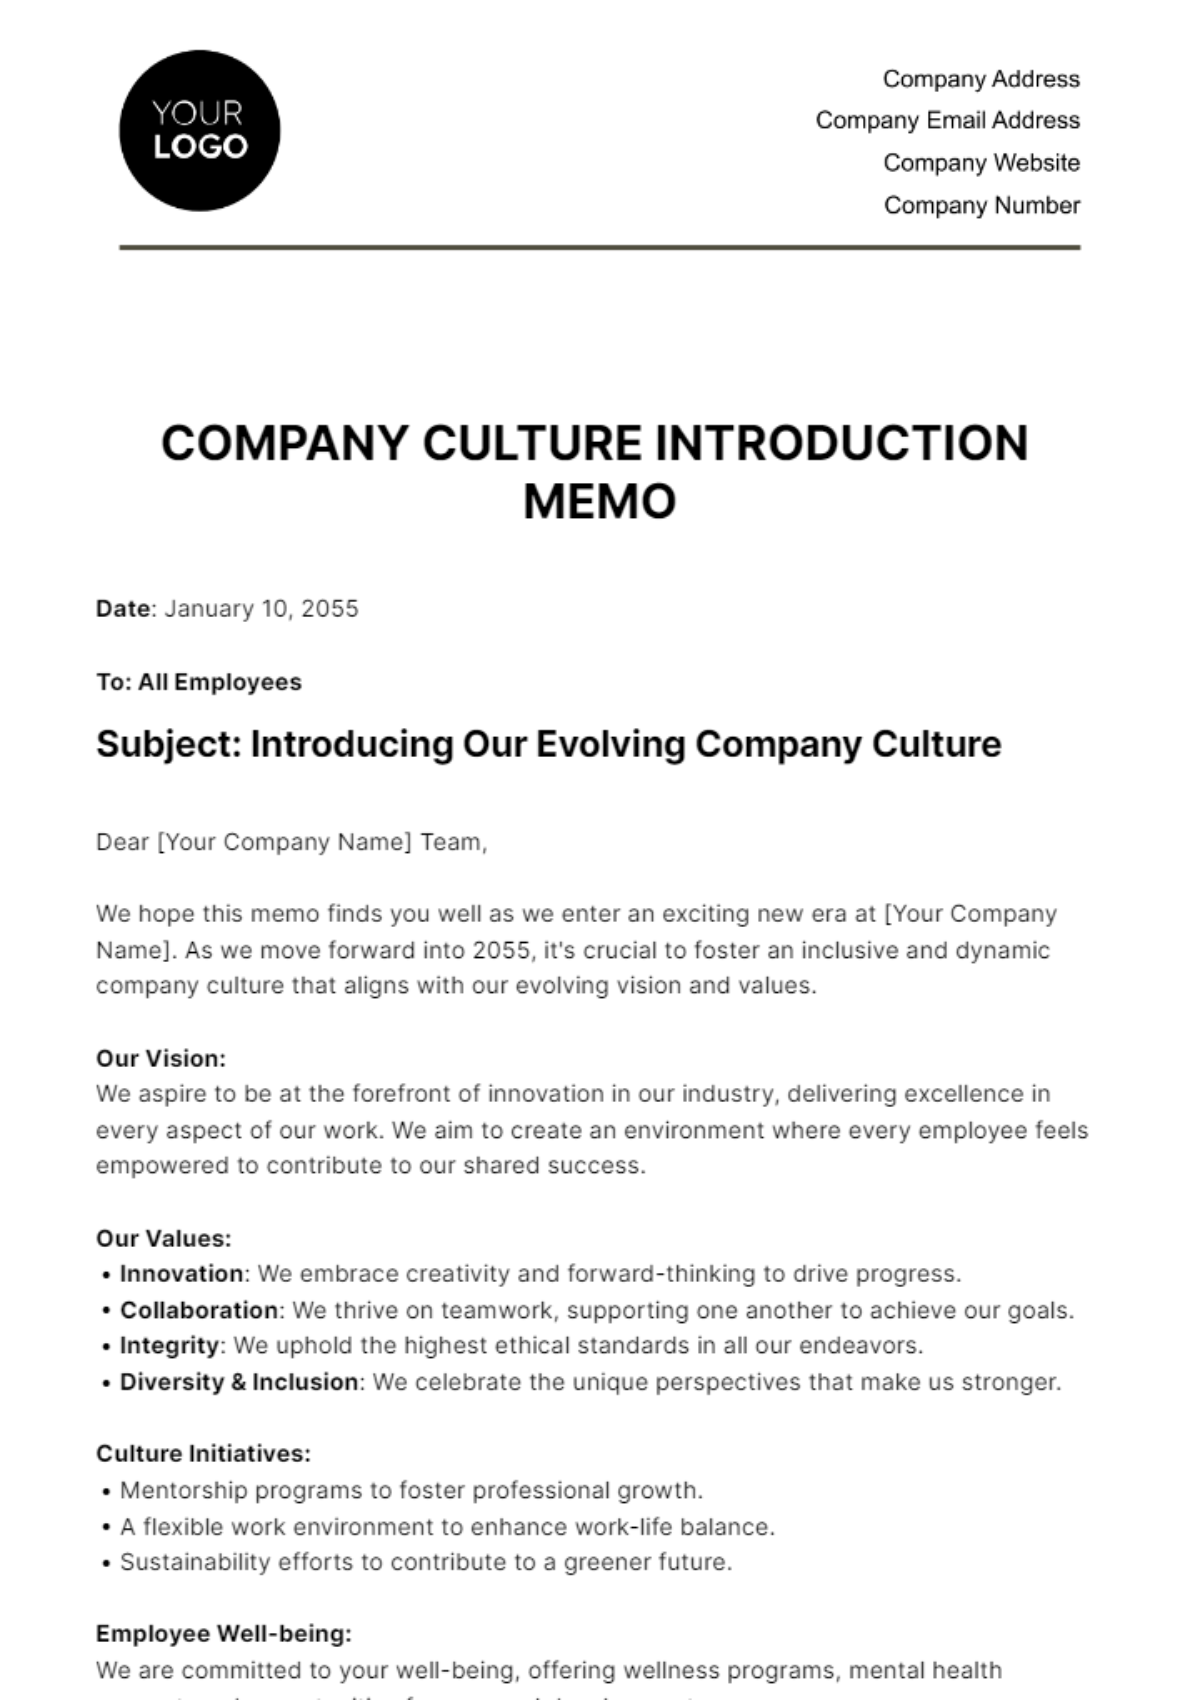 Free Company Culture Introduction Memo HR Template